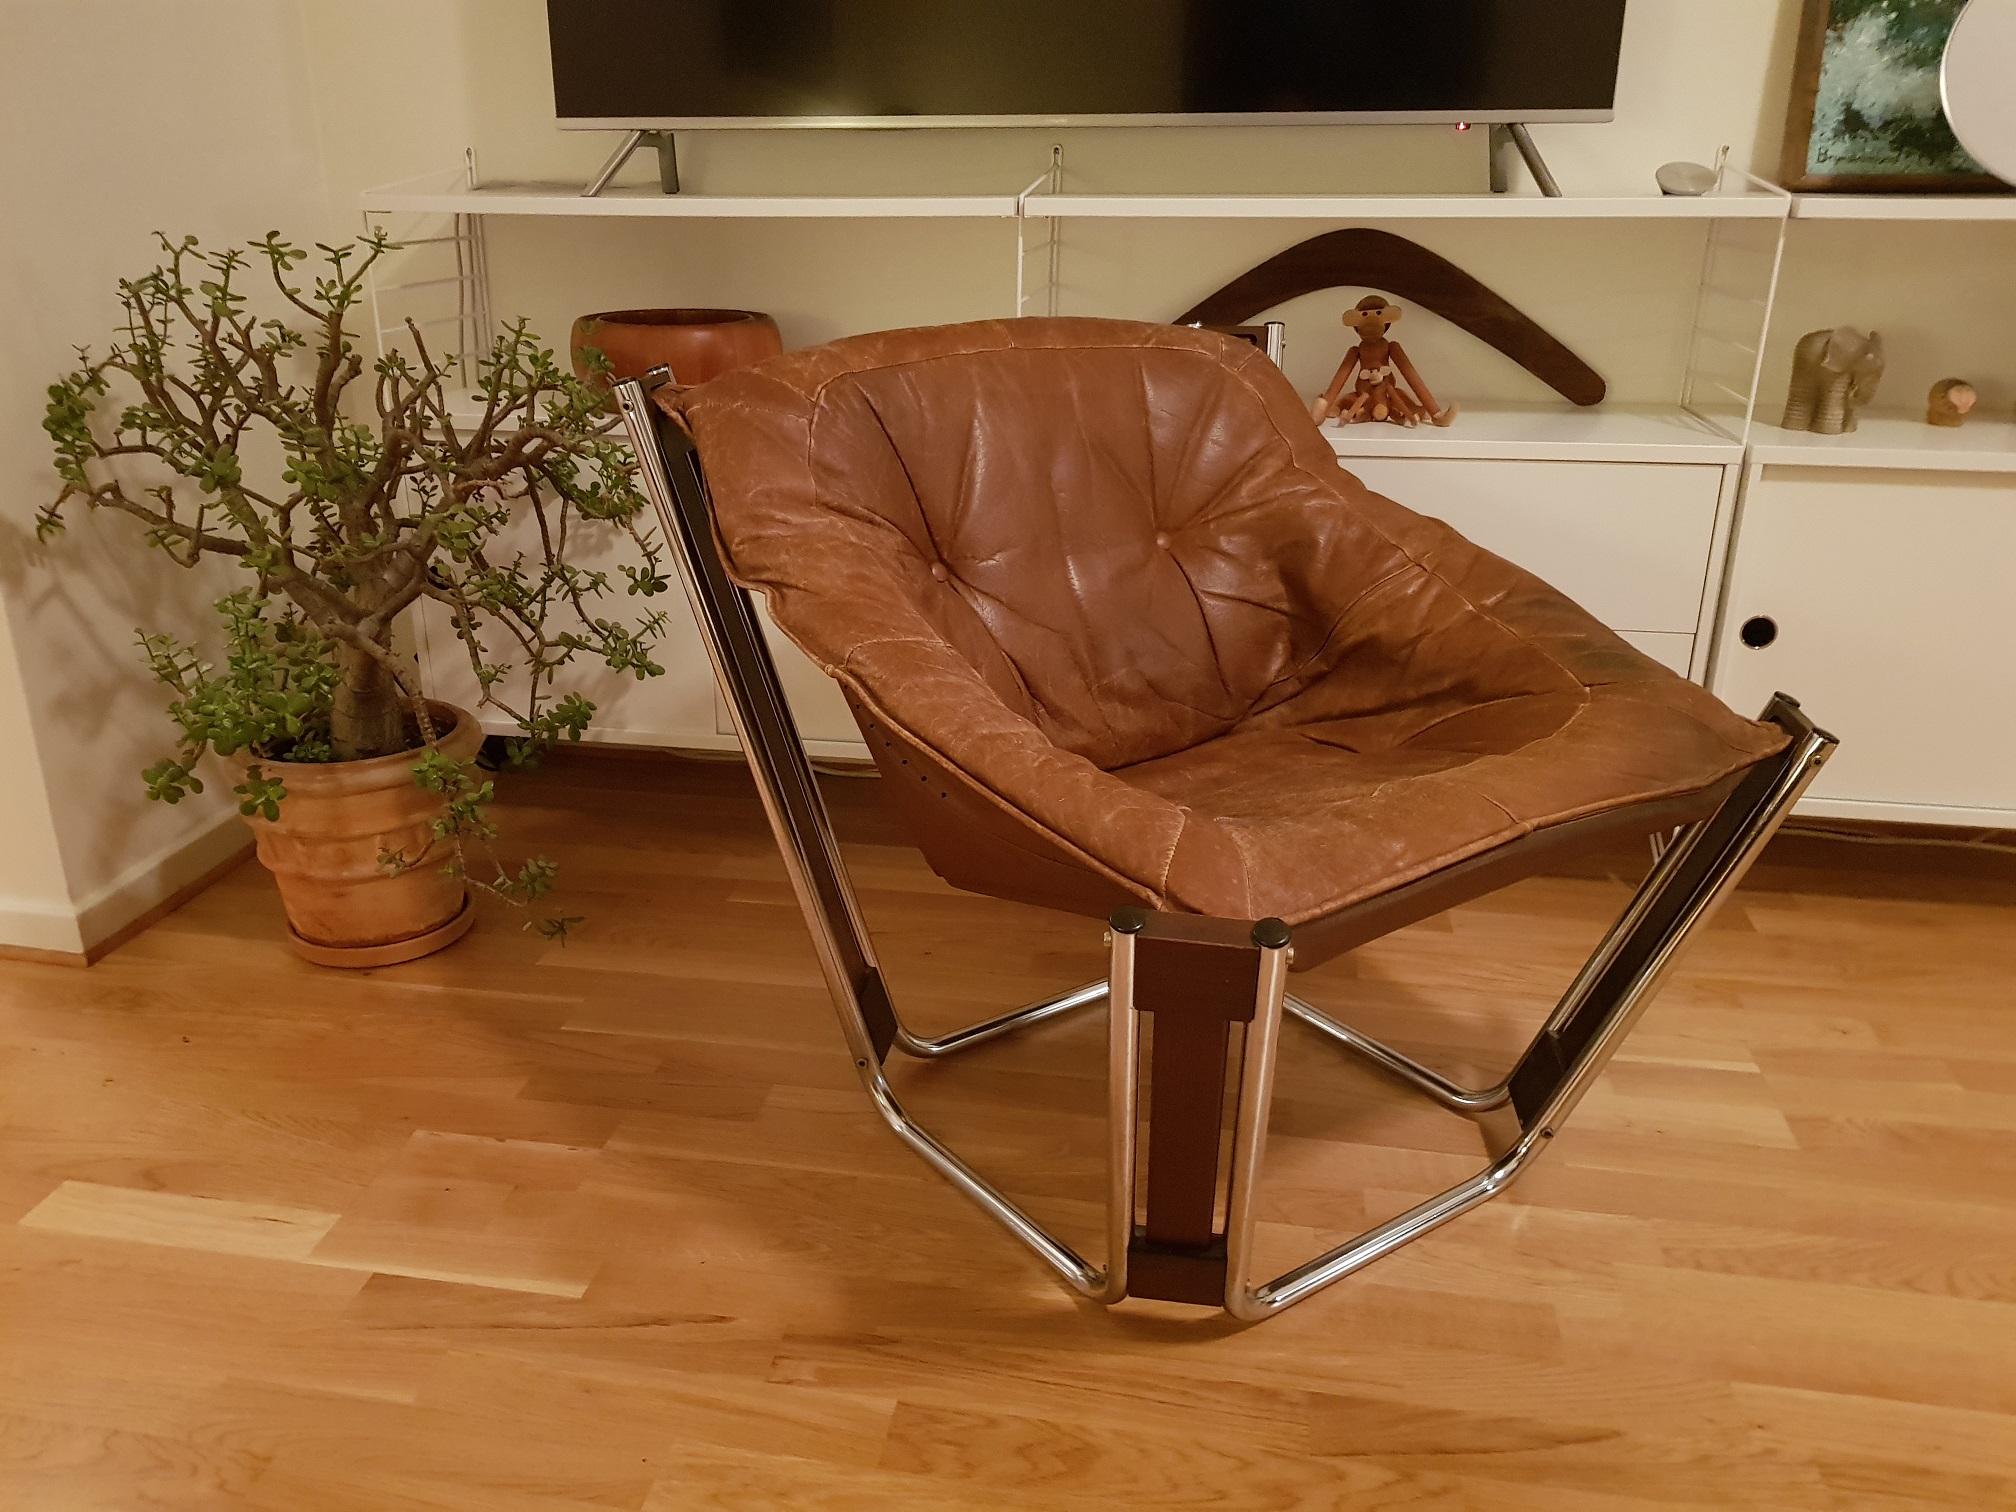 1 vintage lounge chair in brown leather and chromed base designed and produced in the 1970s. Great looking patina. Design by the Norwegian designer Odd Knutsen and made in Norway by Hjellegjerde in the 1970s. This is a furniture that inspires and